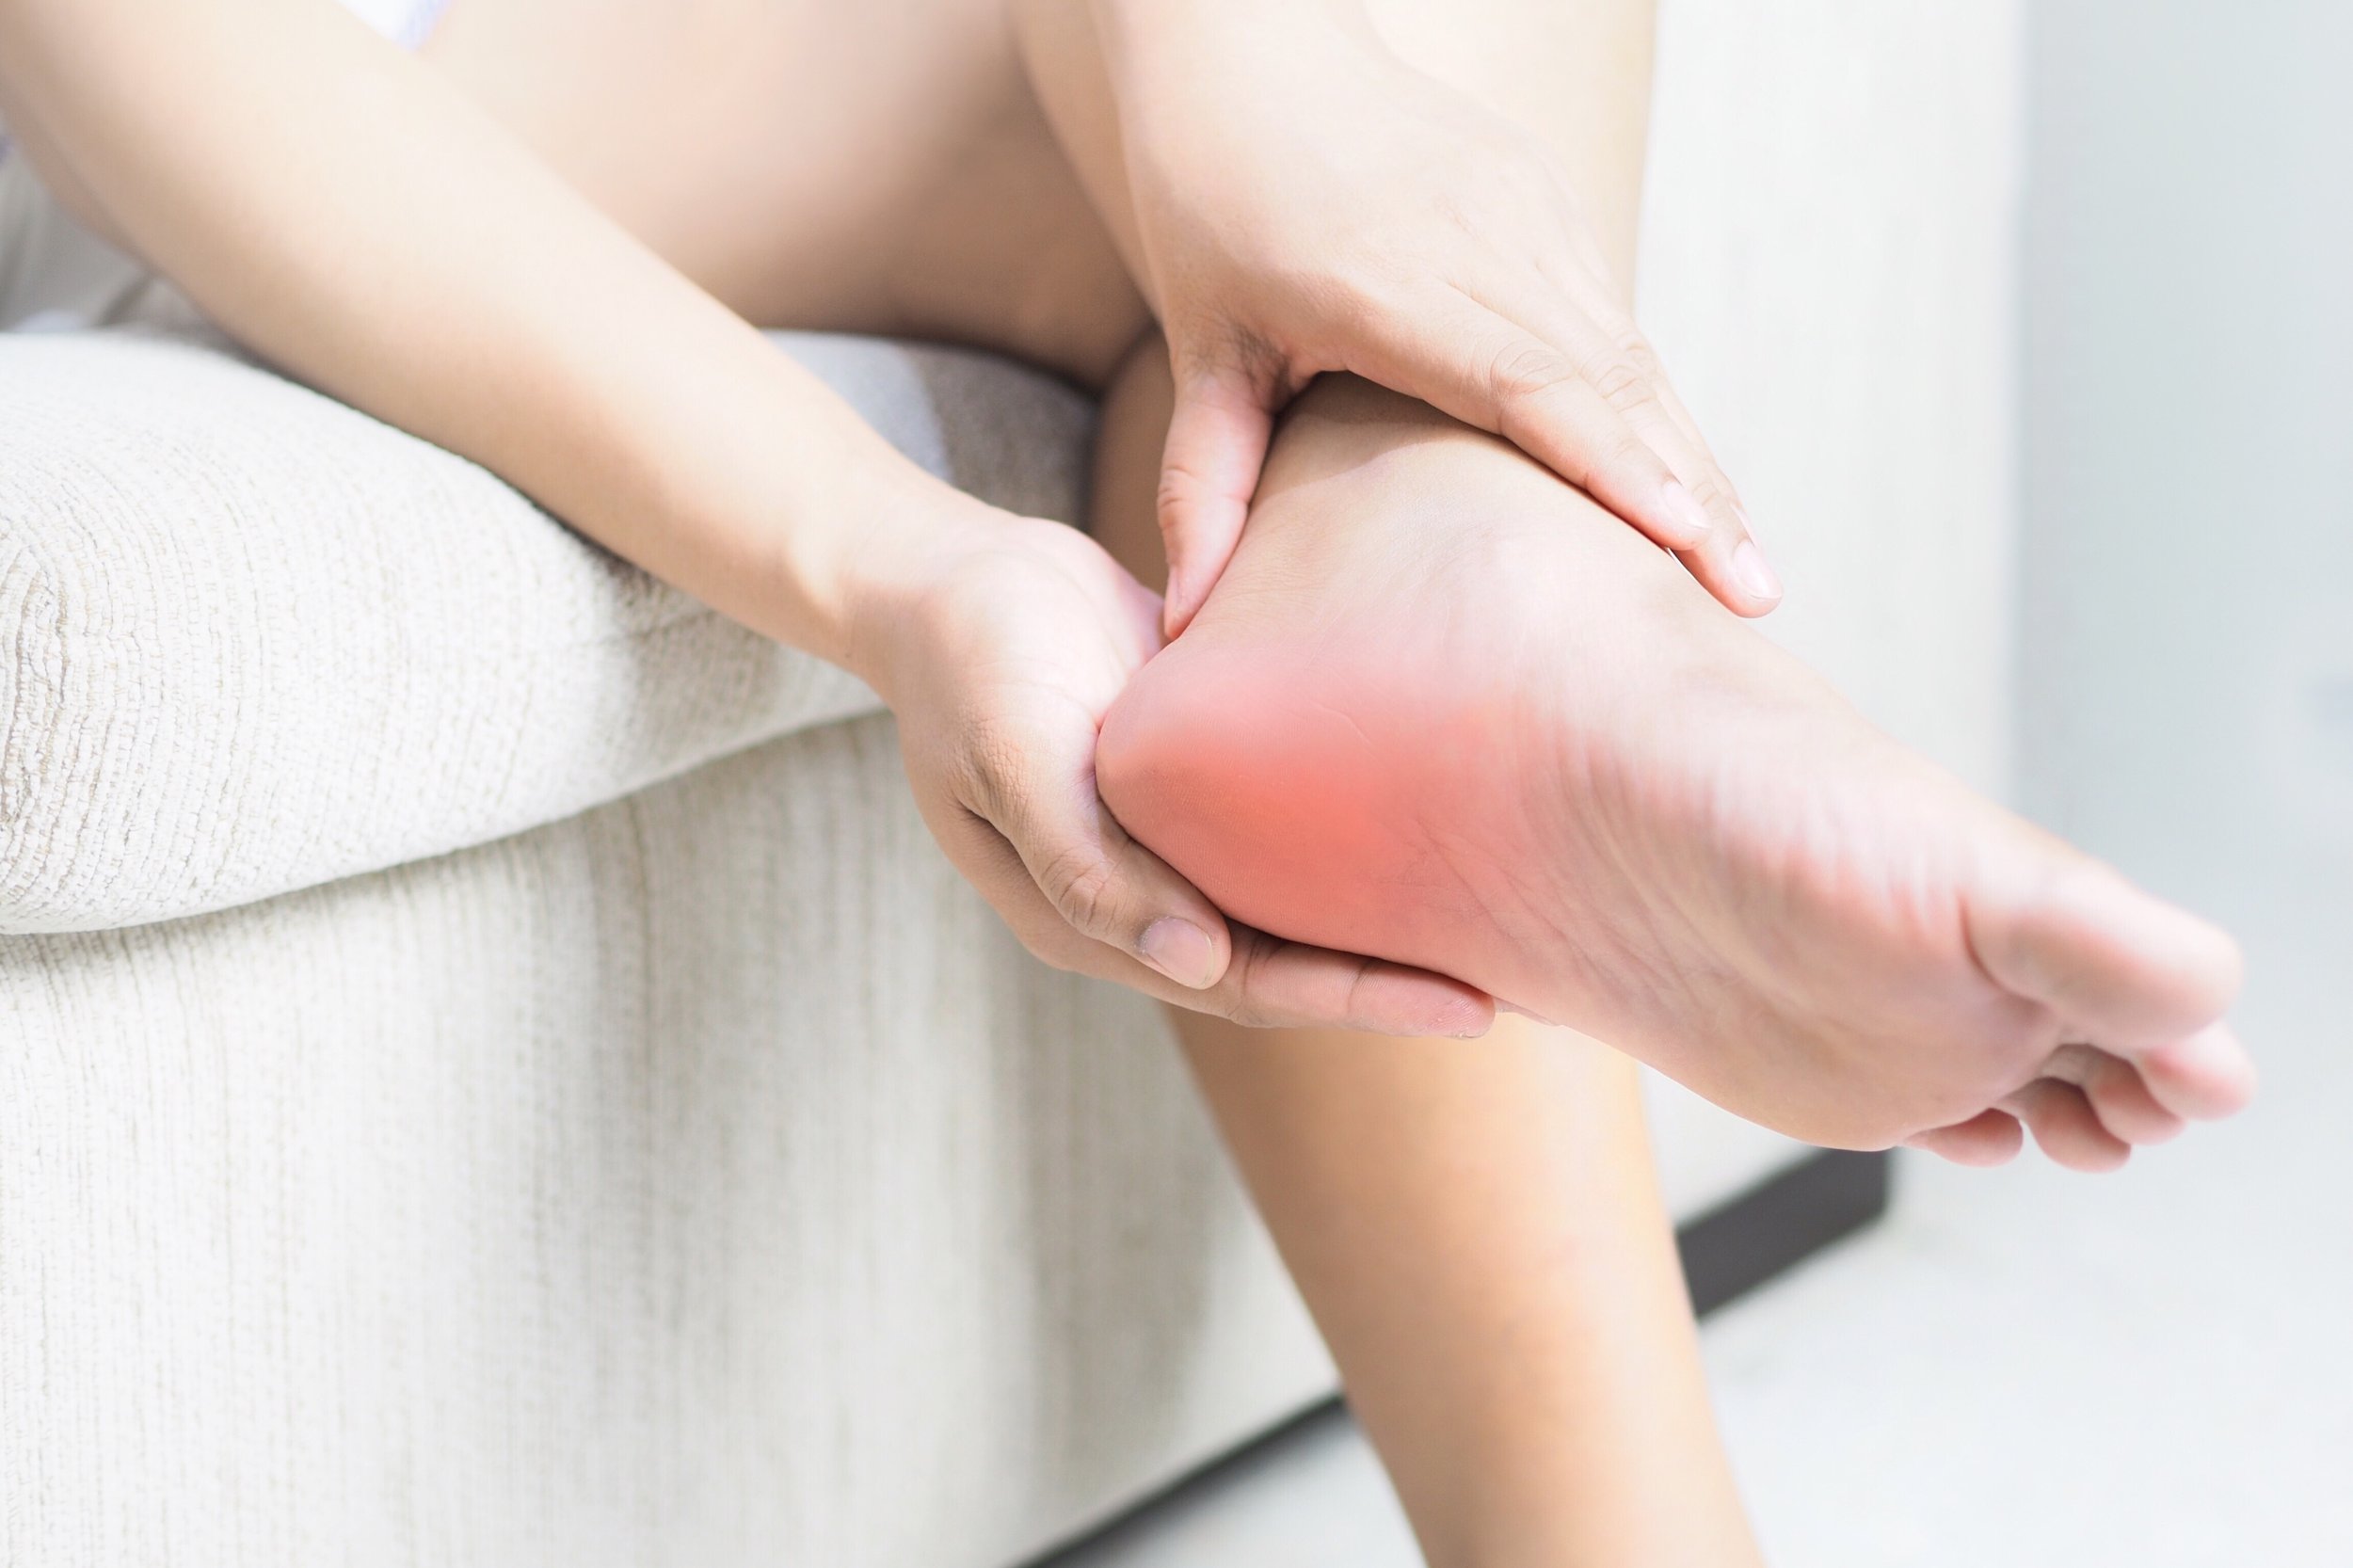 Plantar Fasciitis treatment at My Foot Doctor (Chiropodist & Podiatrist) in  Motherwell offers a wide variety of treatment for plantar fasciitis,  insoles, orthotics, low level laser therapy,